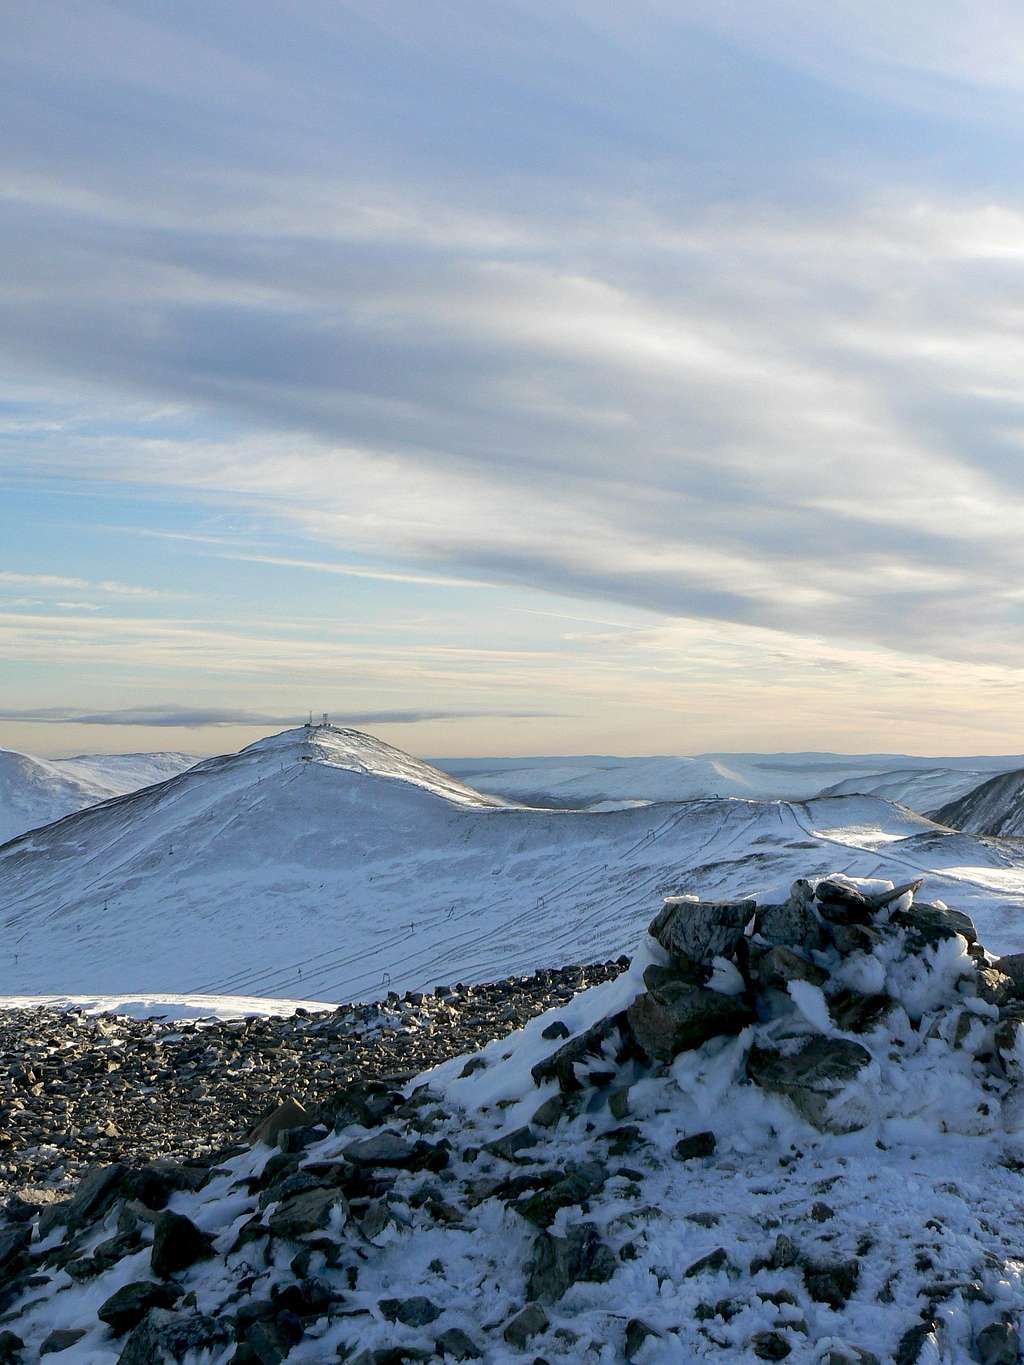 The Cairnwell